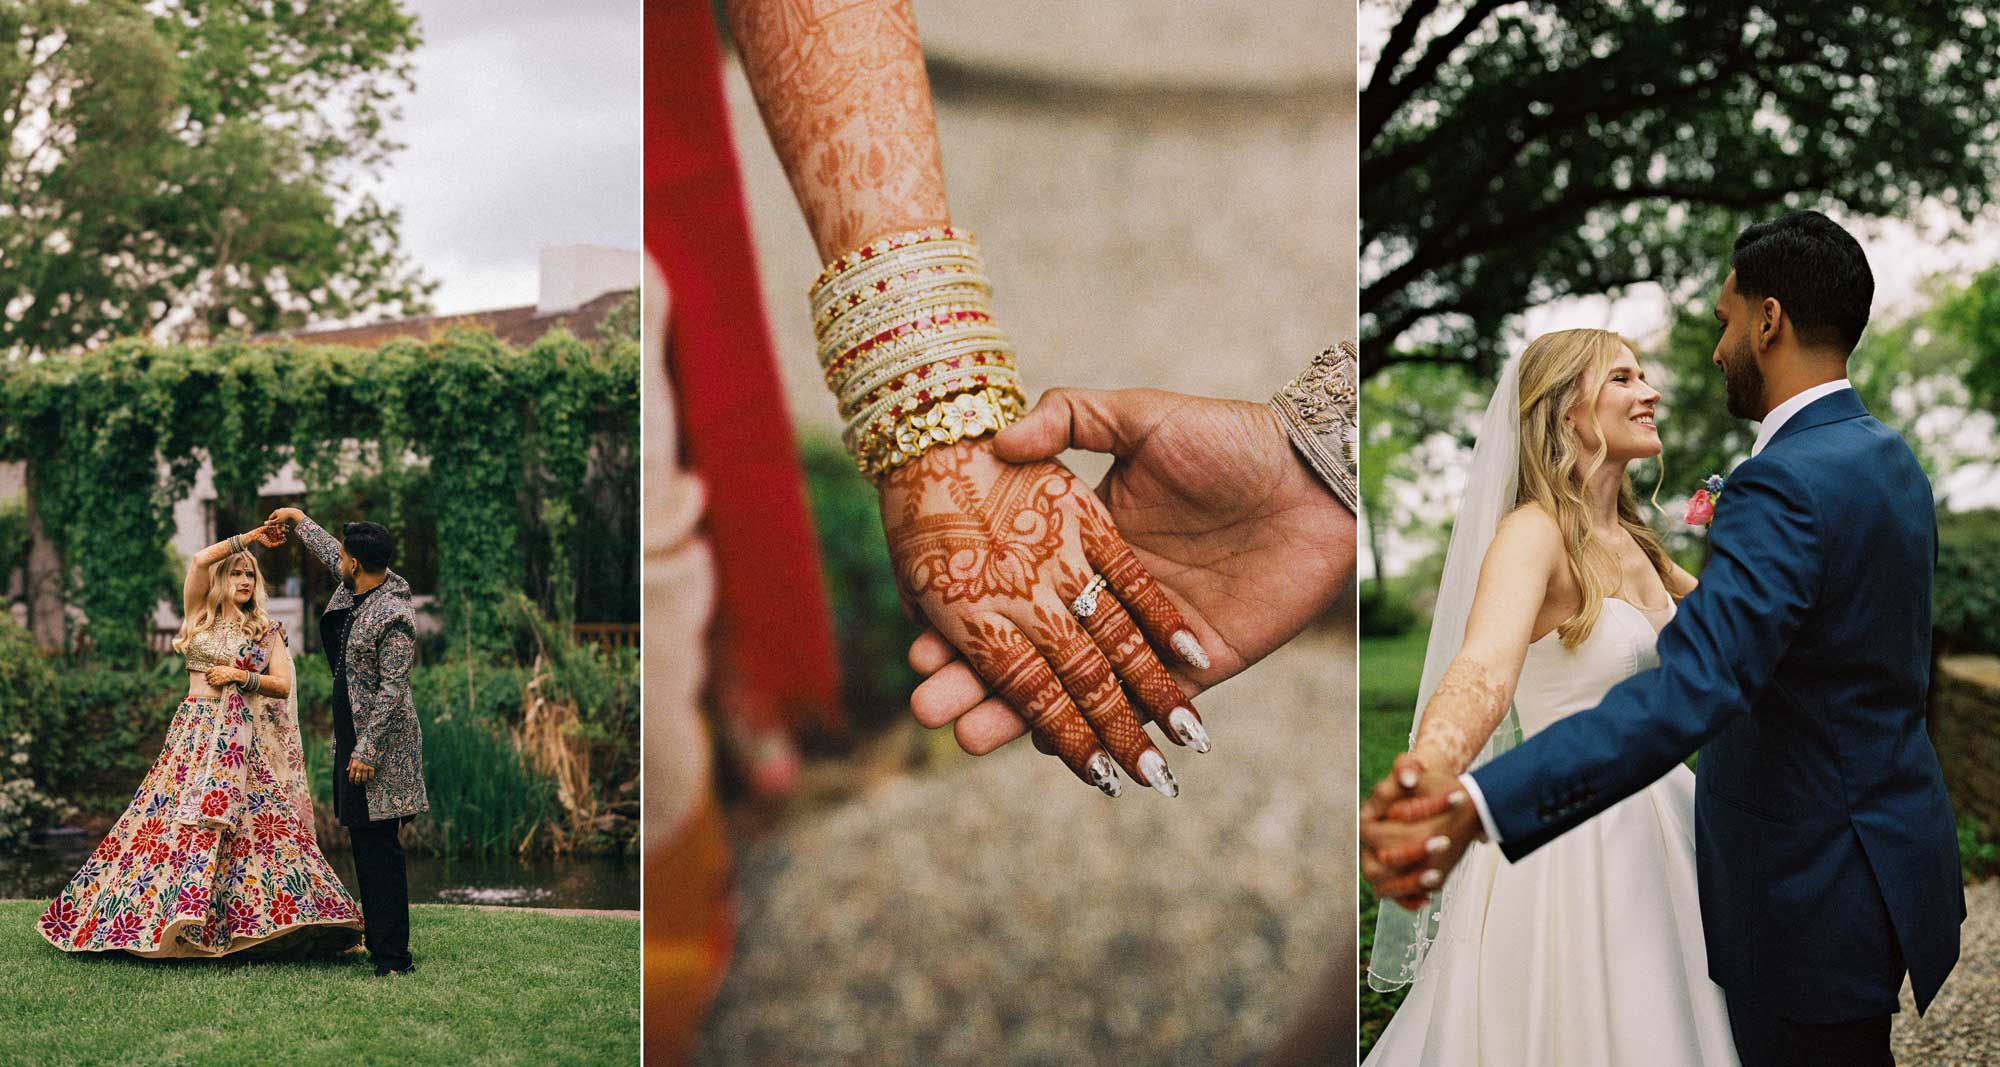 Indian Fusion holding hands in a Seattle garden on their wedding day